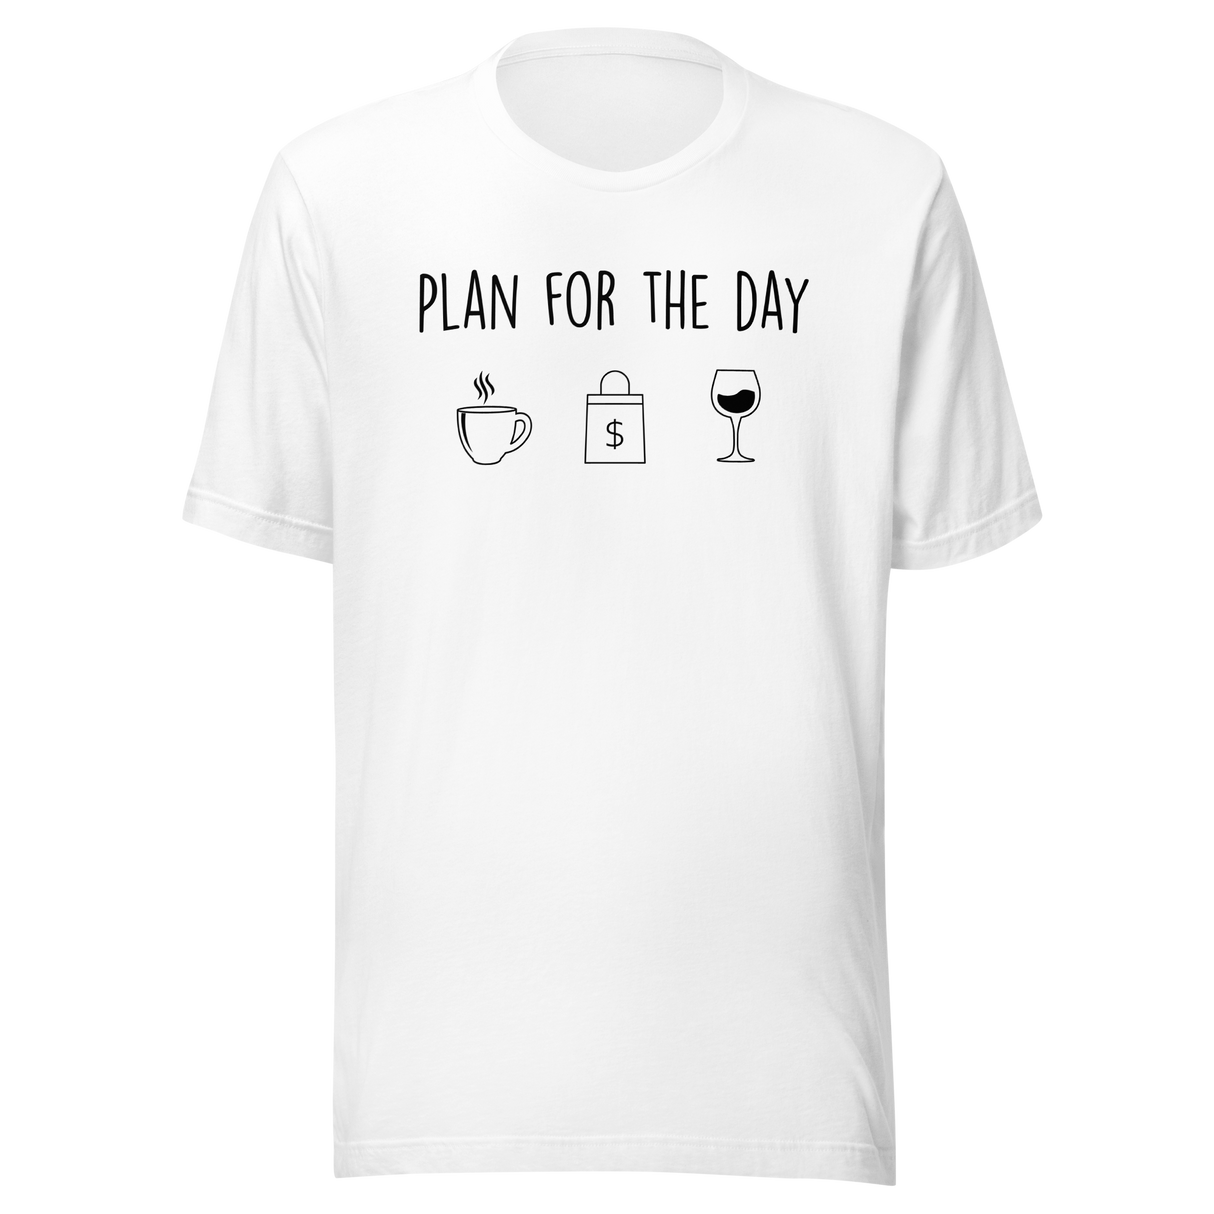 plan-for-the-day-shopping-tee-fashion-t-shirt-wine-tee-life-t-shirt-truth-tee#color_white